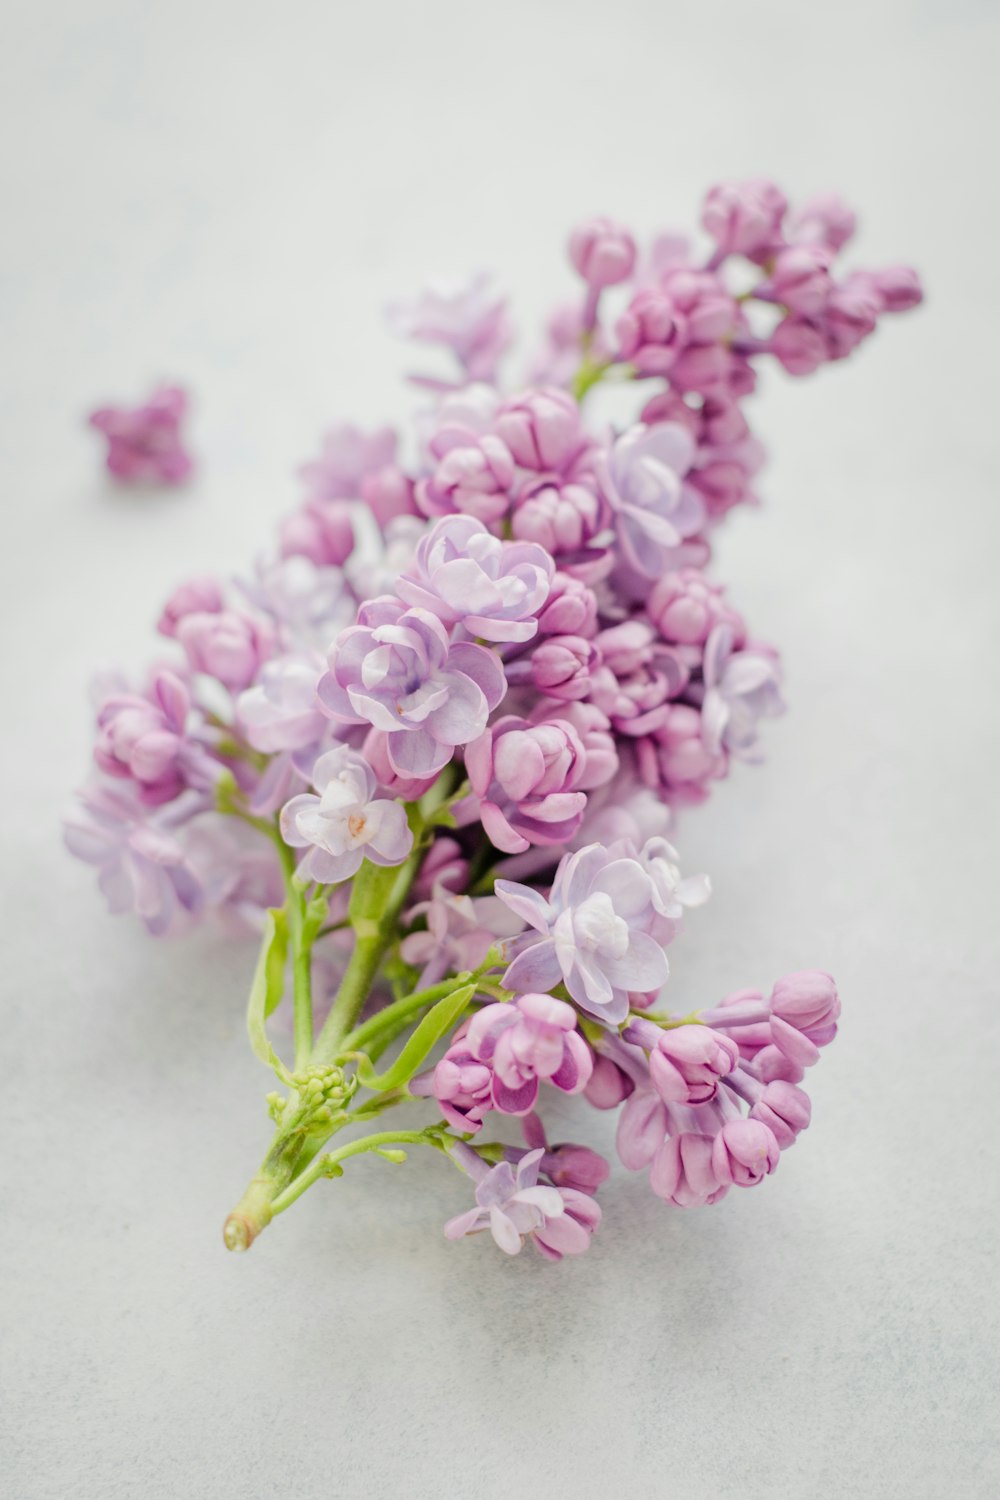 pink cluster petaled flower on gray surface